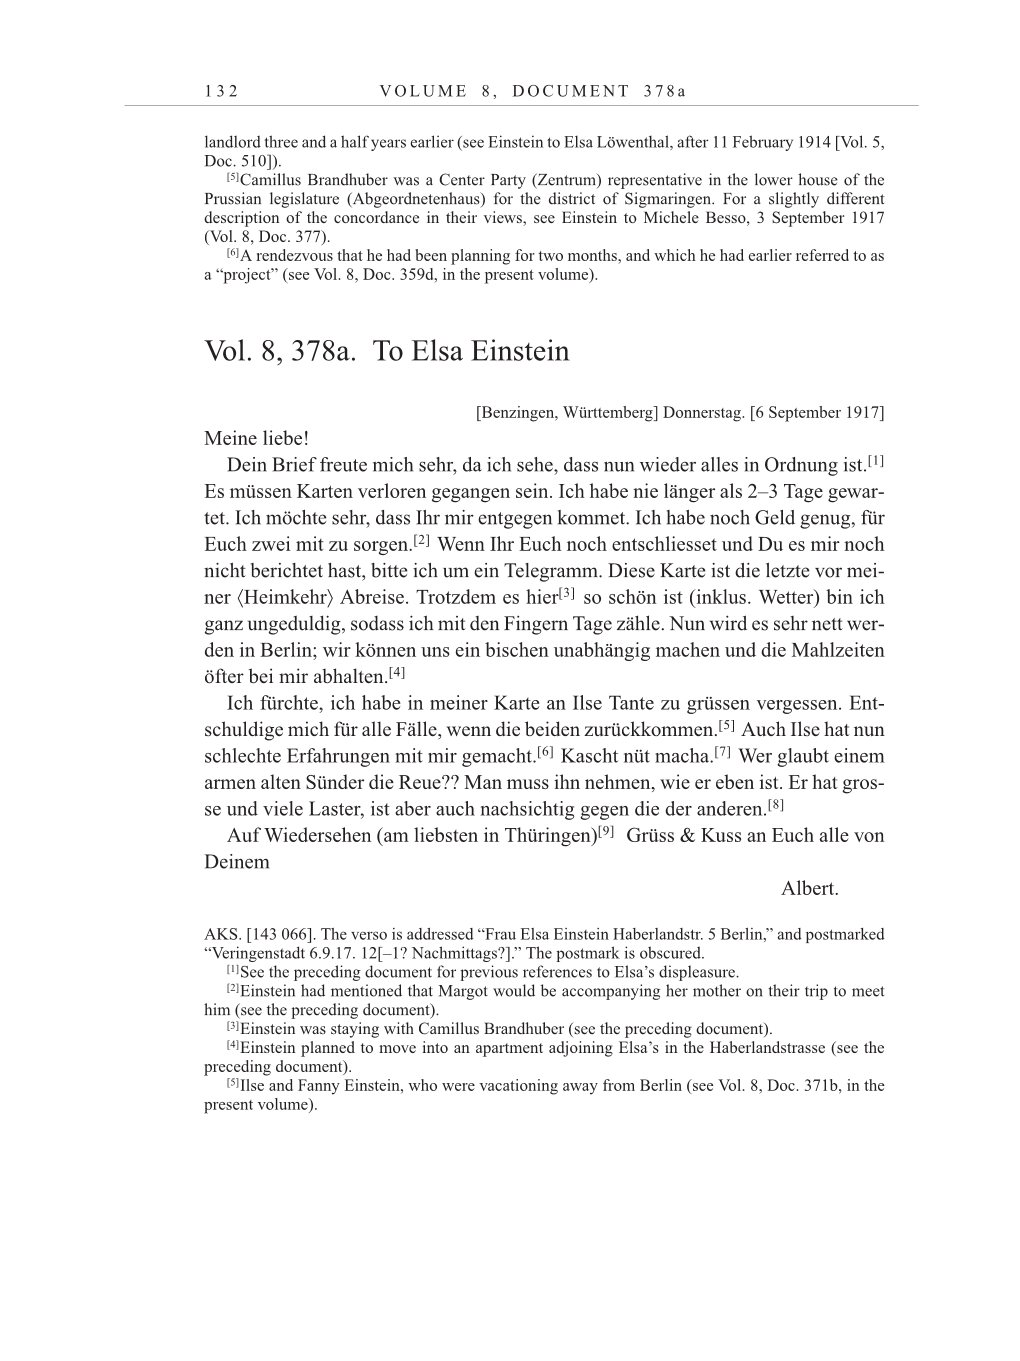 Volume 10: The Berlin Years: Correspondence May-December 1920 / Supplementary Correspondence 1909-1920 page 132